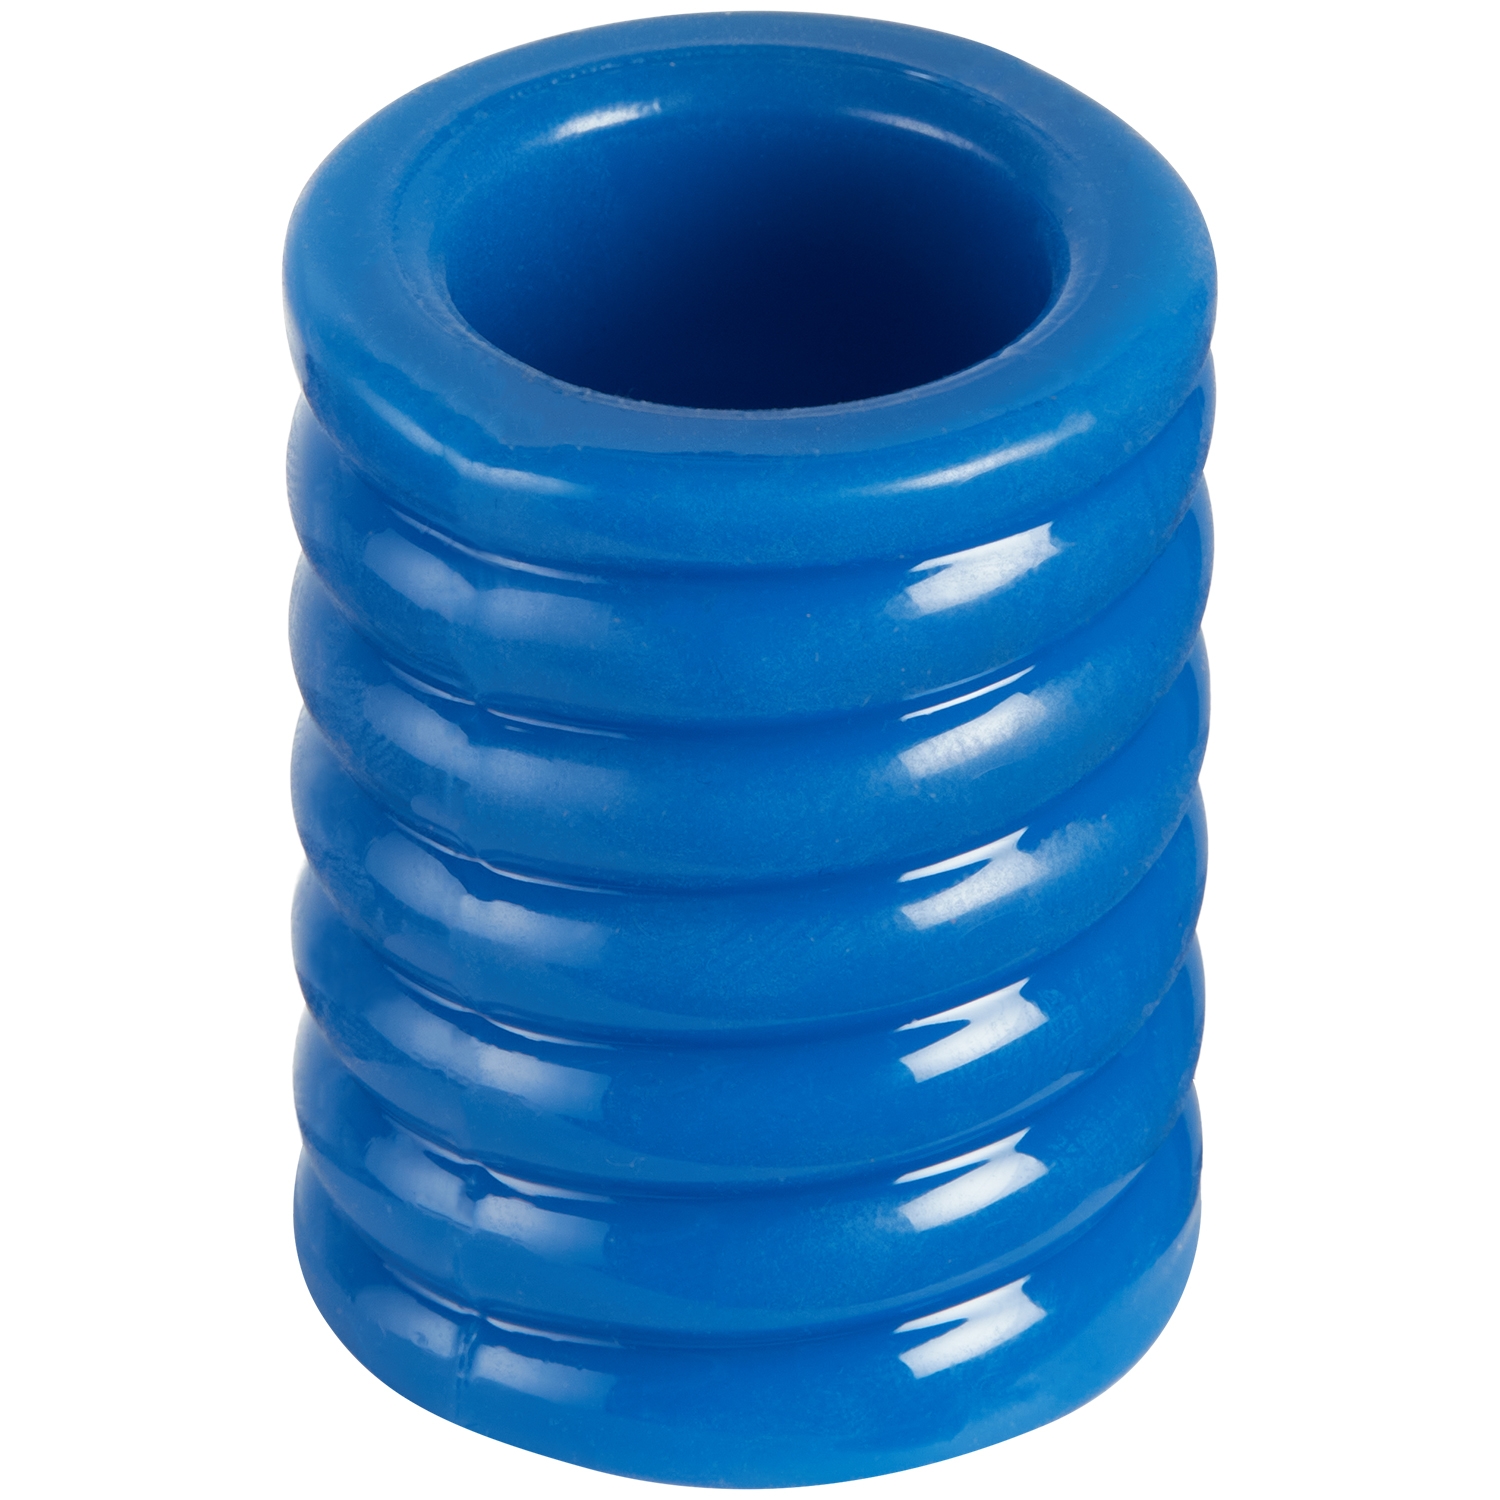 TitanMen Stretch Cock Cage Penis Ring - Blue